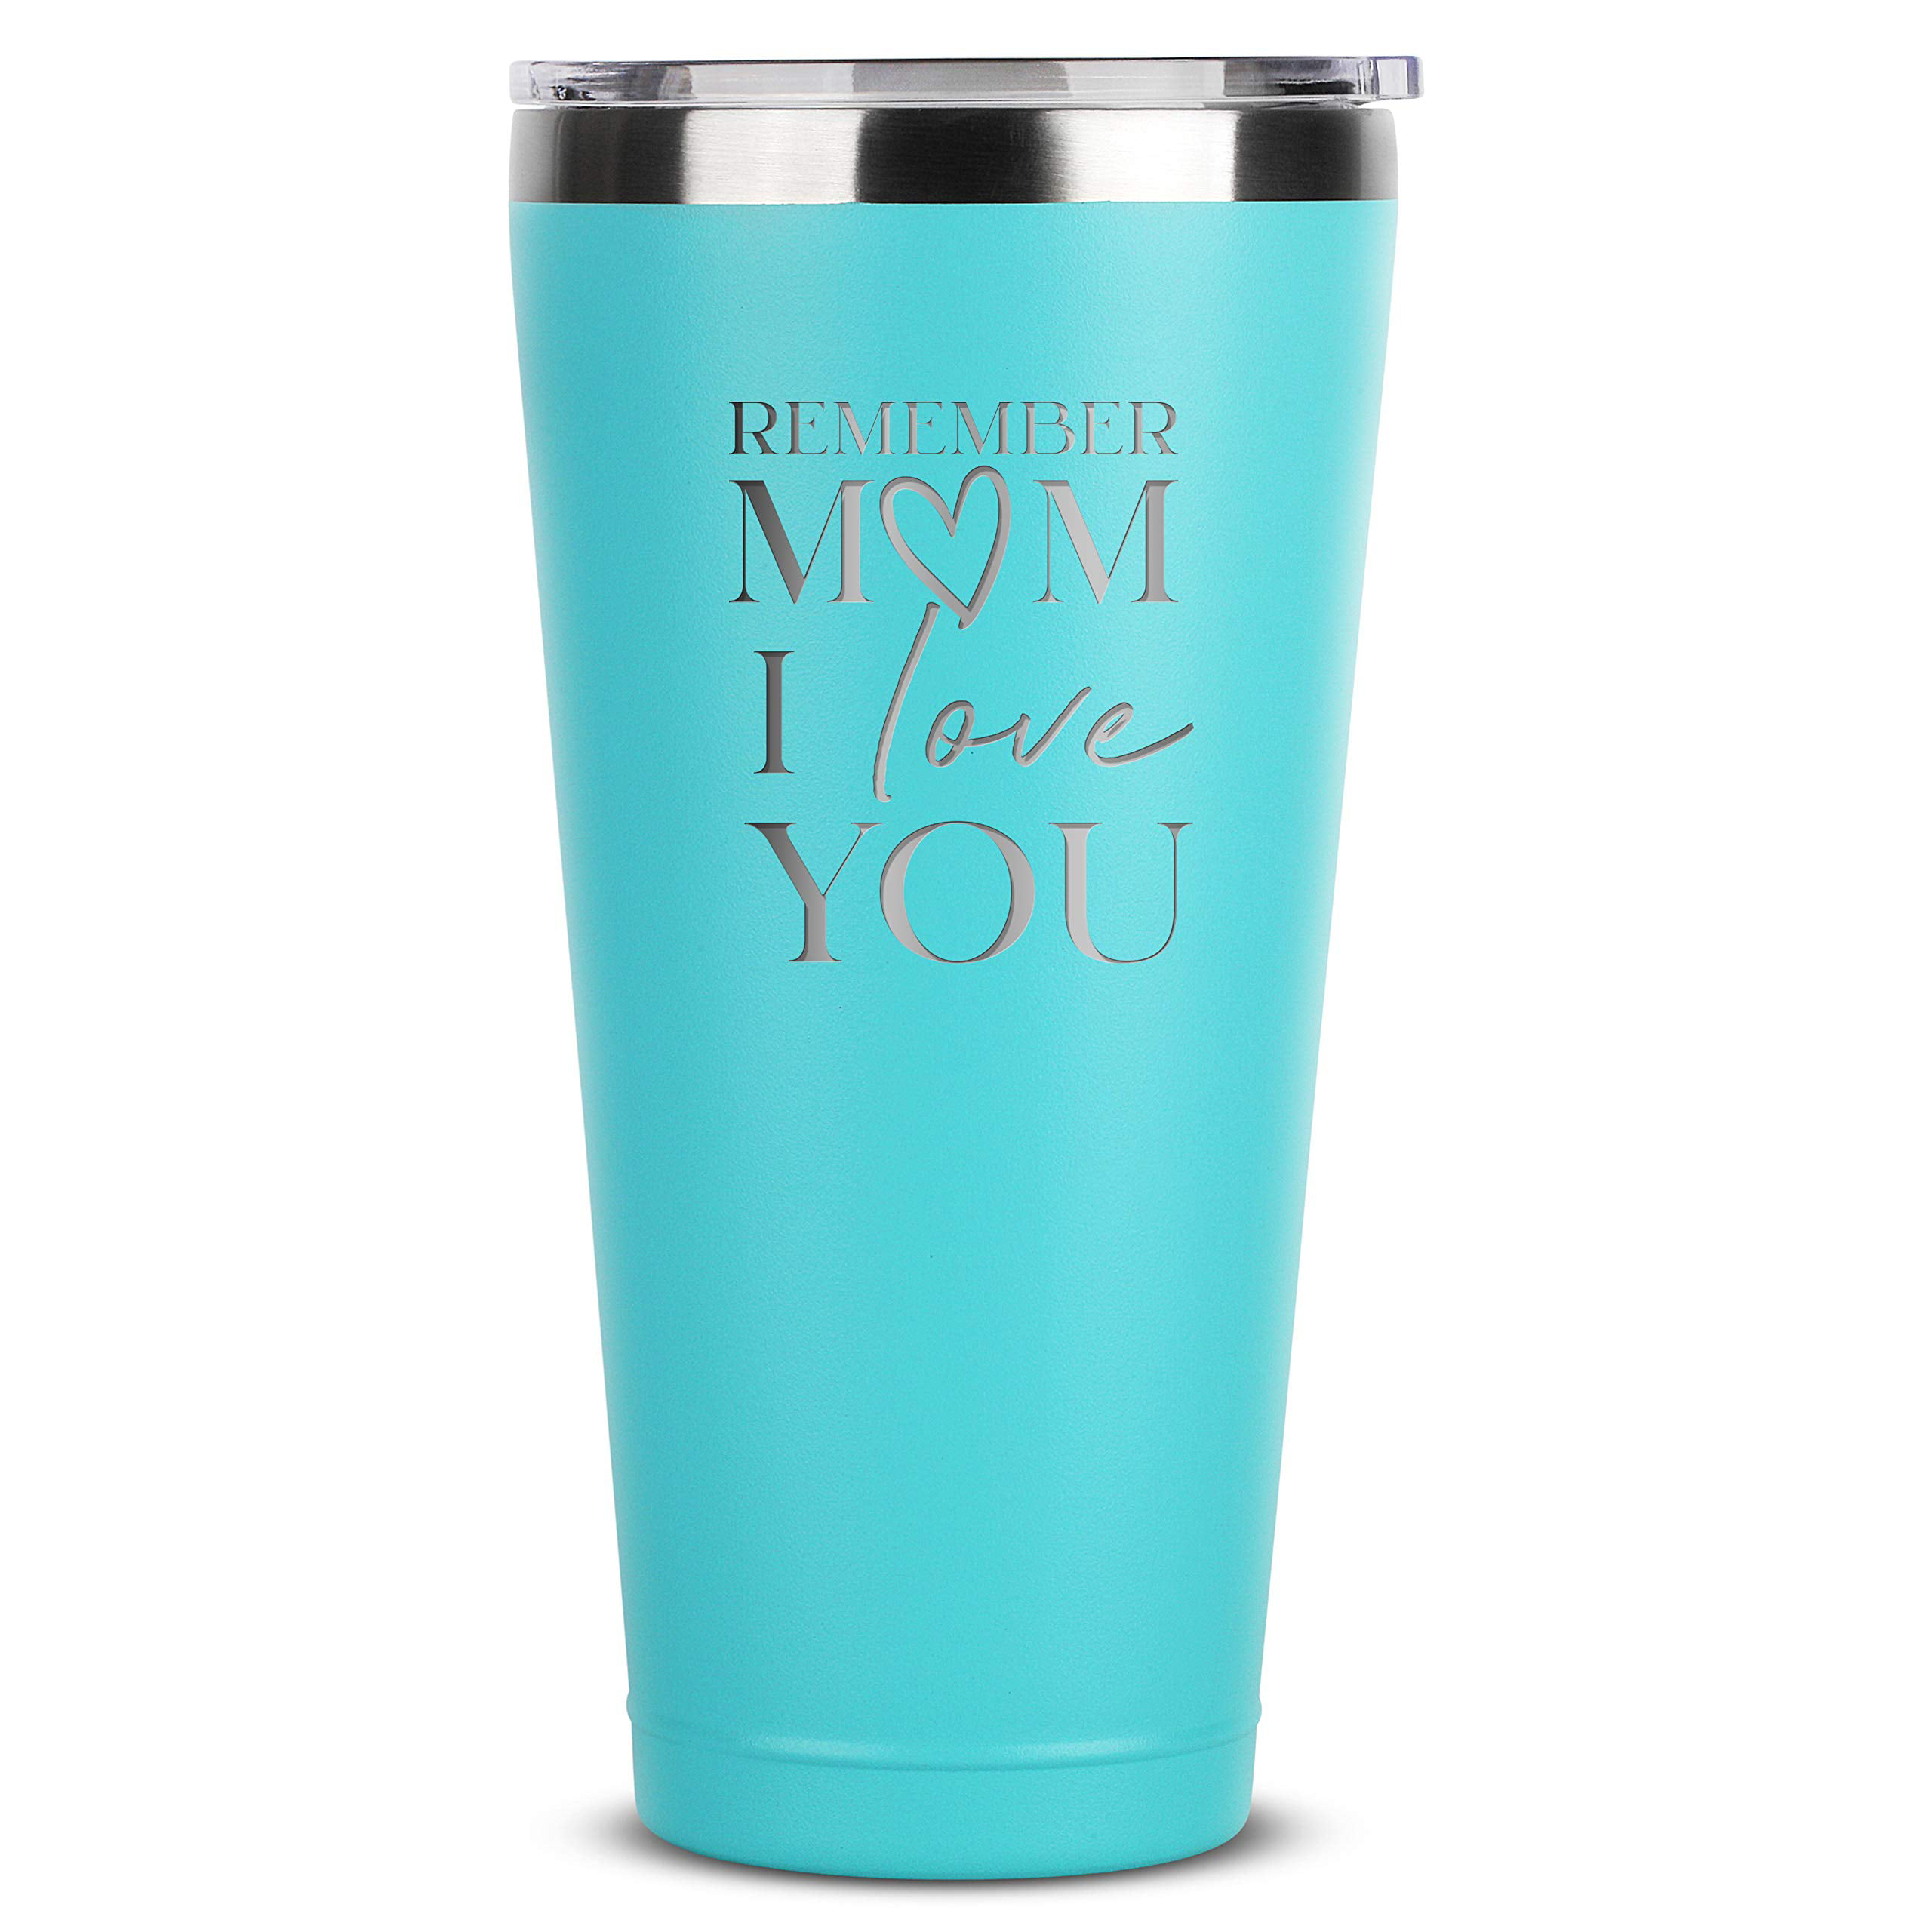 Moms Dads Gifts Mugs My Favorite Child Gave Me This Cup Birthday Mothers Fathers Day Christmas Gift Ideas from Daughter Son Kids 16 oz White Insulated Stainless Steel Tumbler w/Lid for Mom Dad 